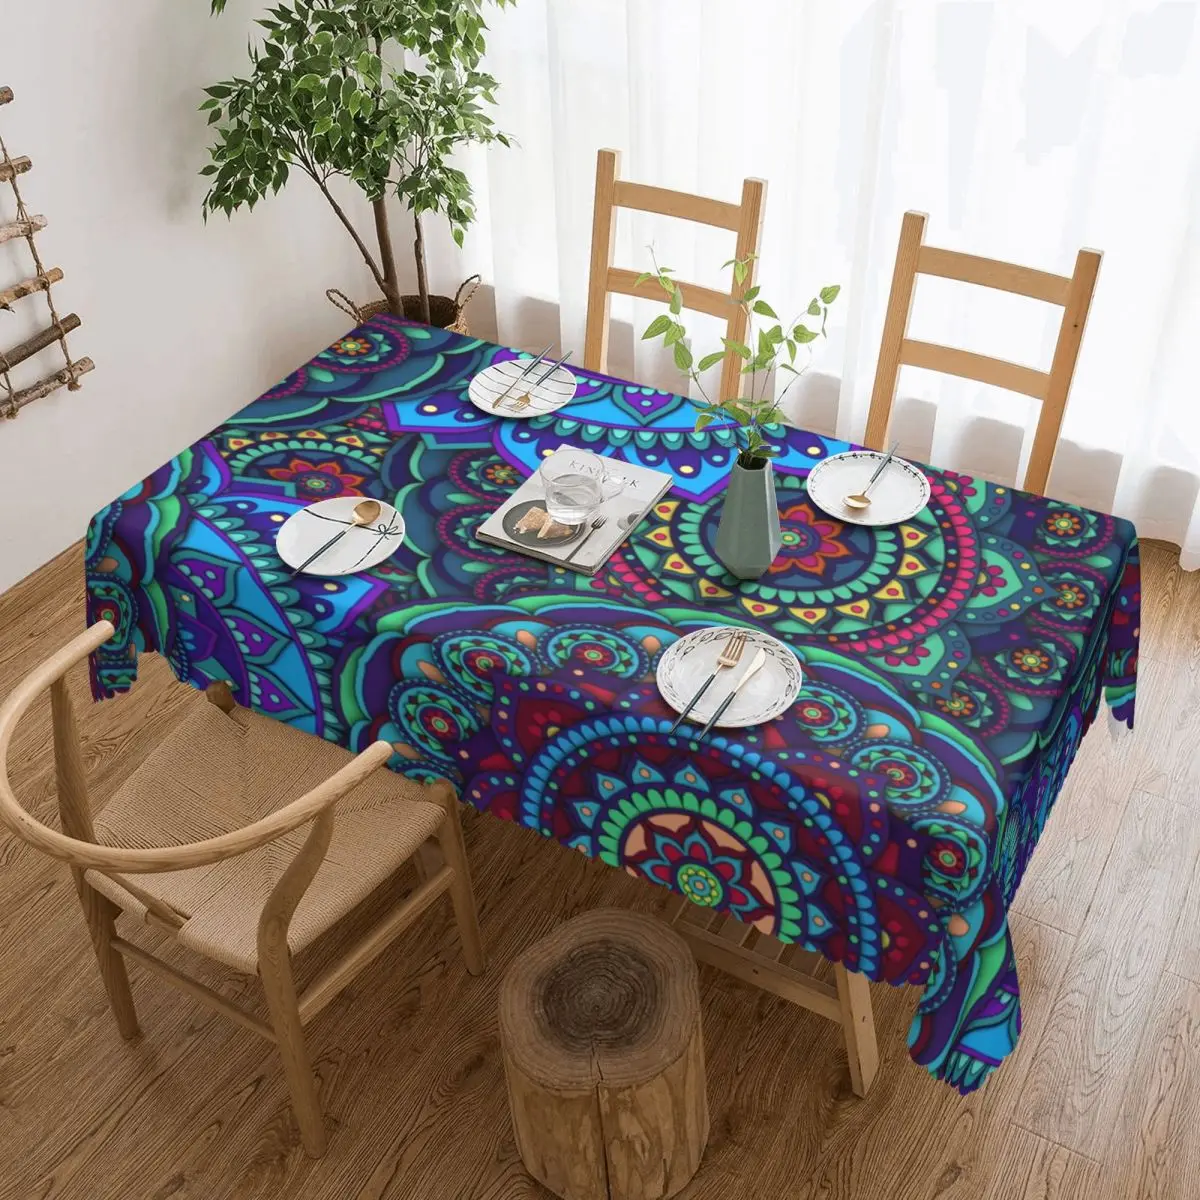 

Rectangular Waterproof Oil-Proof Mandala Flower Deanfun Colorful Tablecloth Table Cover 45"-50" Fit Table Cloth